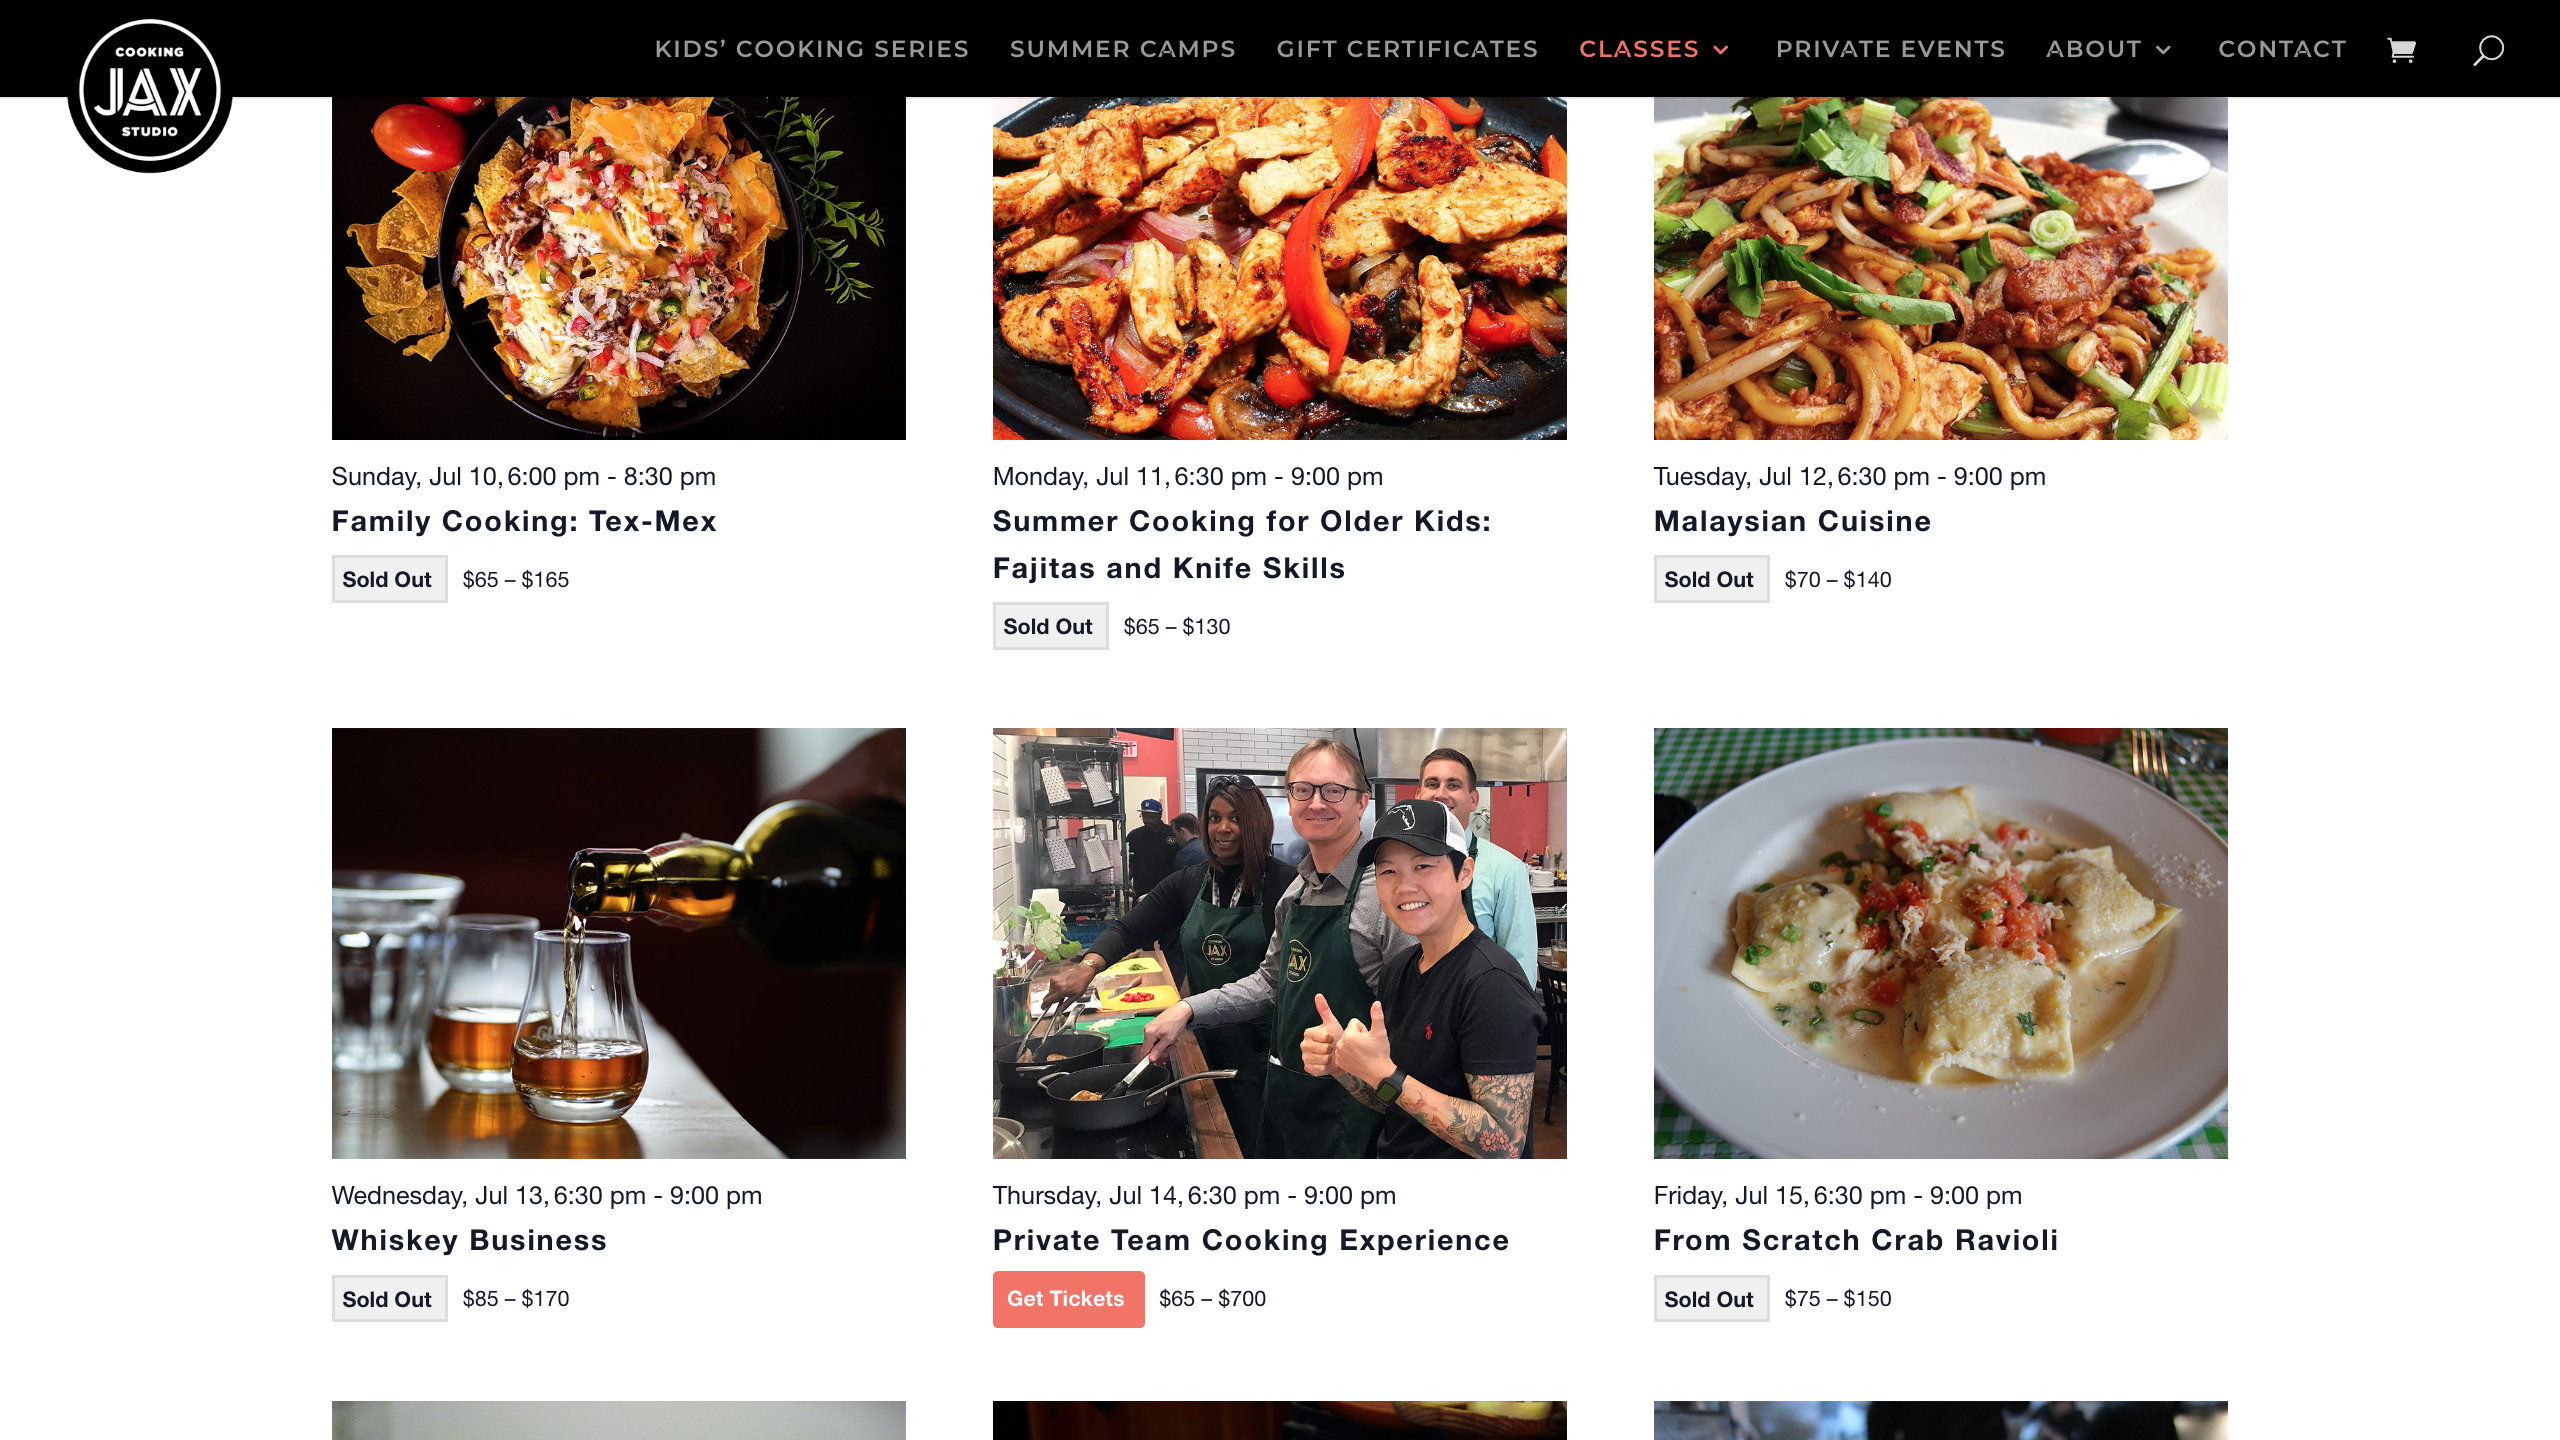 JAX Cooking Studio website class page showing different cuisines and sold out tickets.